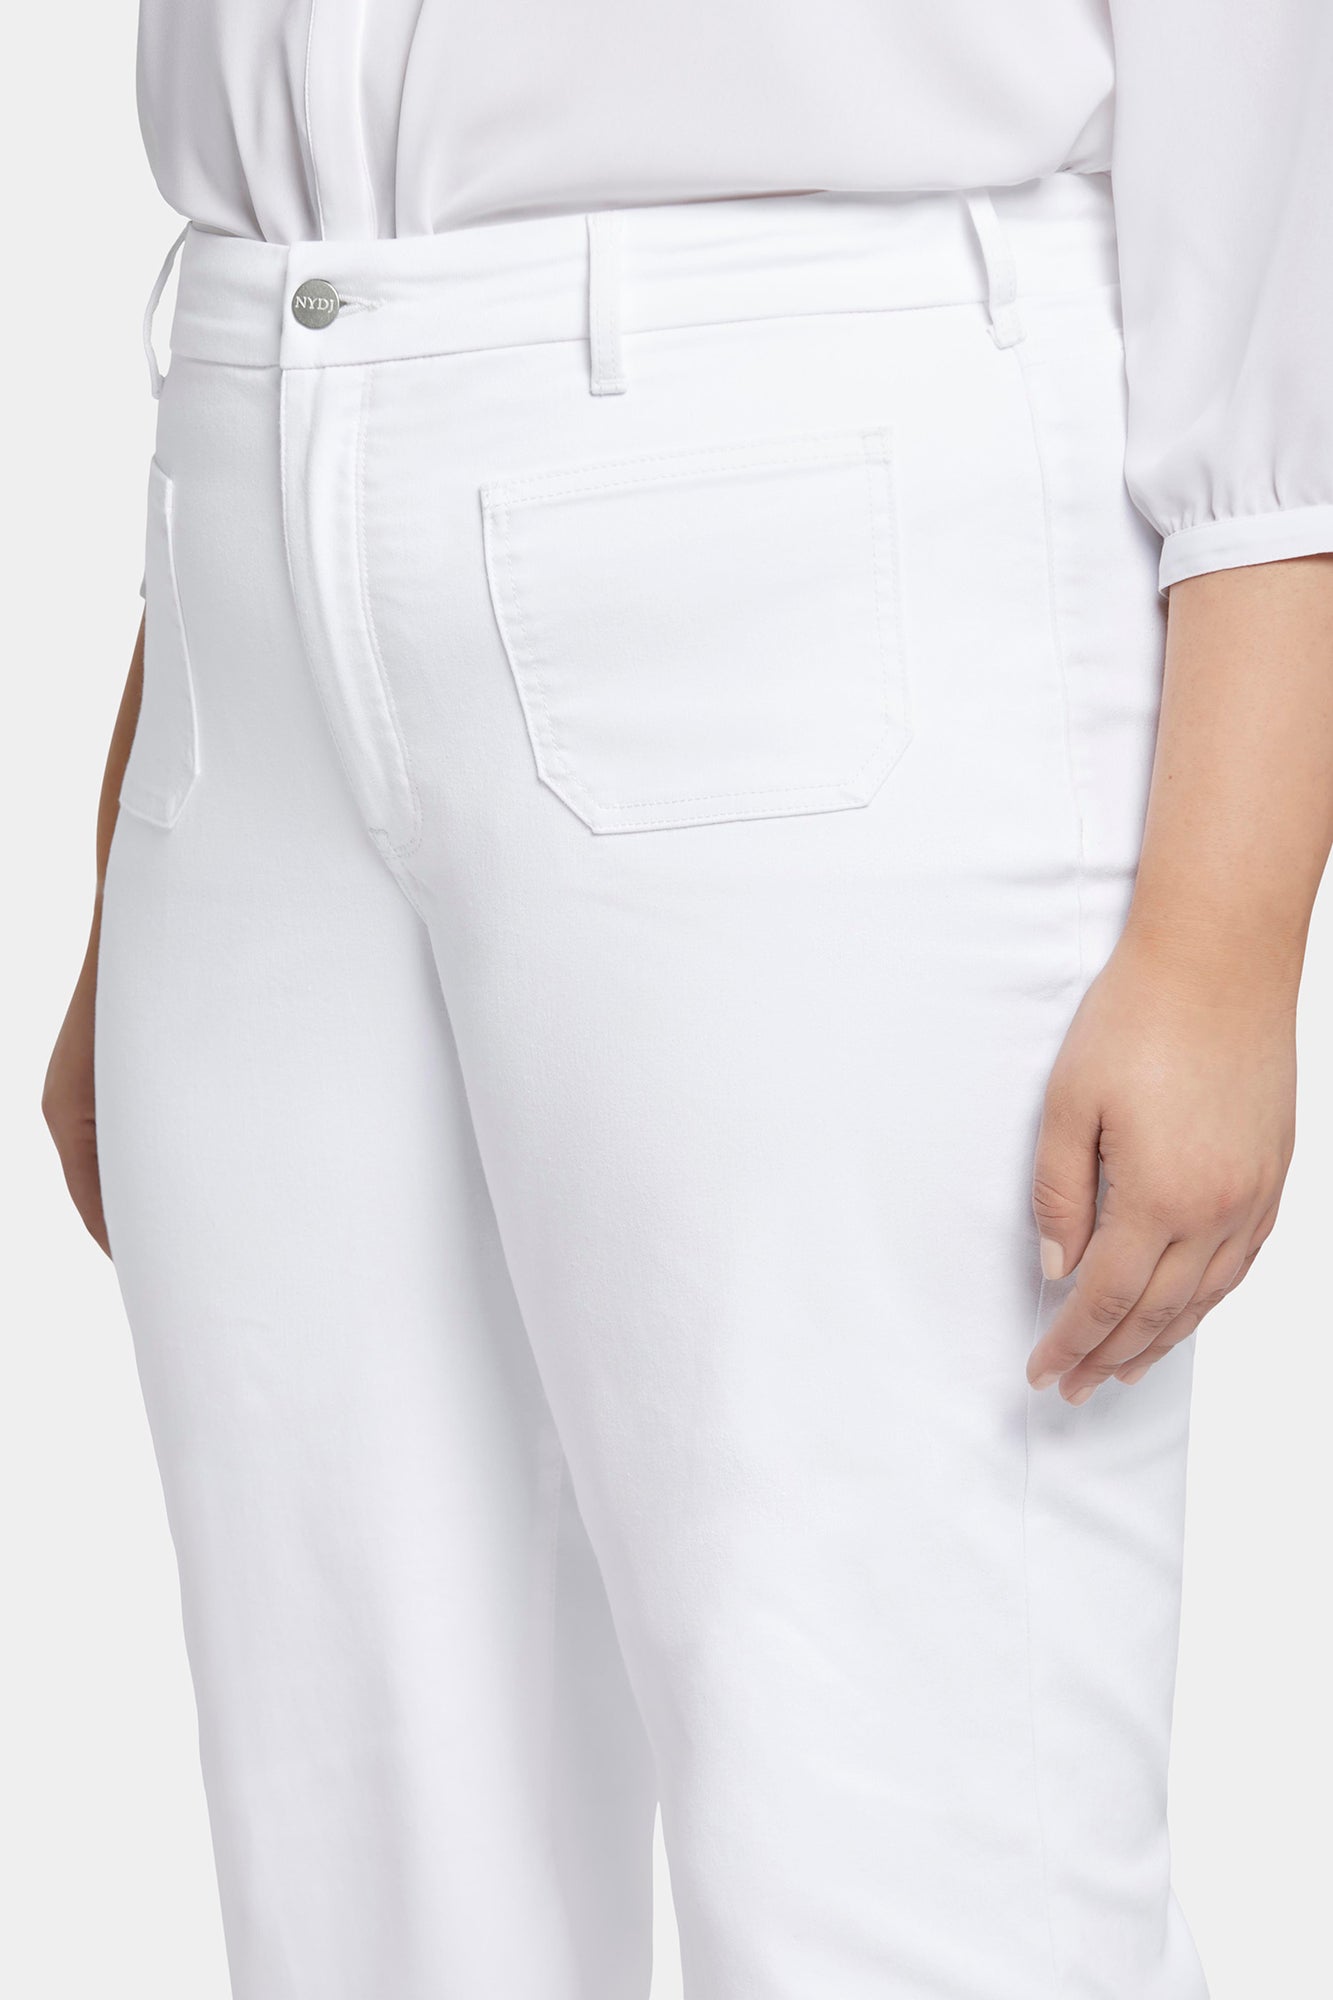 NYDJ Patchie Wide Leg Capri Jeans In Petite Plus Size With Frayed Hems - Optic White